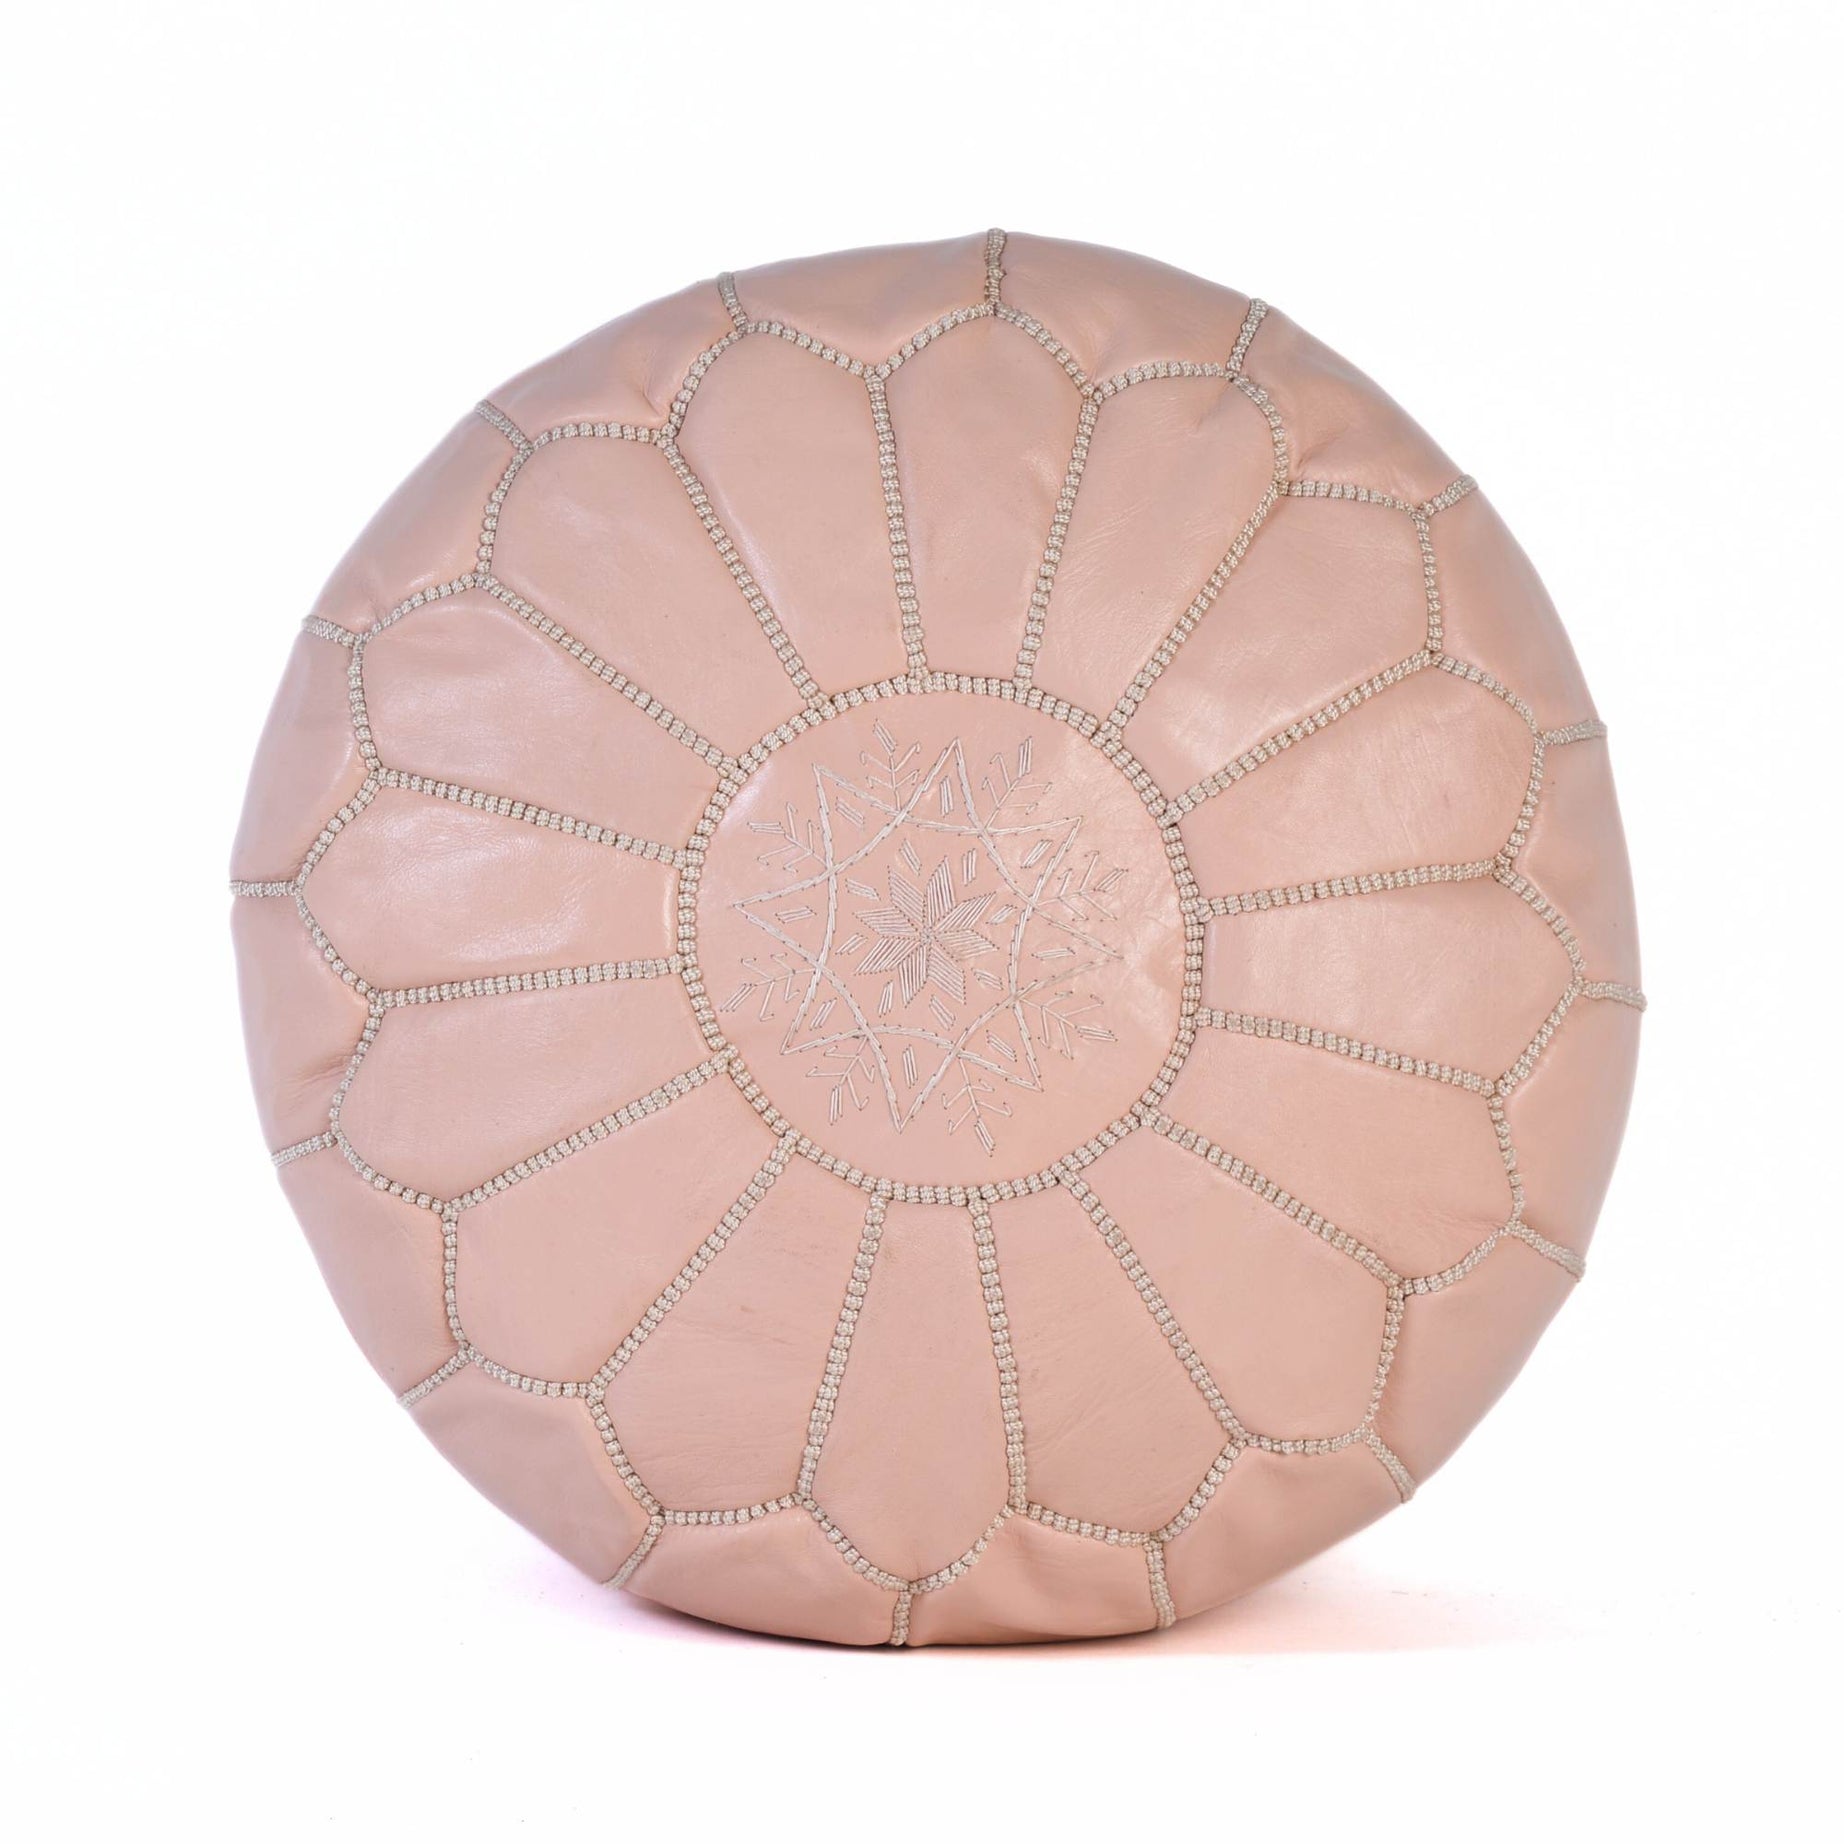 Hand-stitched Embroidery Genuine Leather Ottoman Pouf - Light Pink